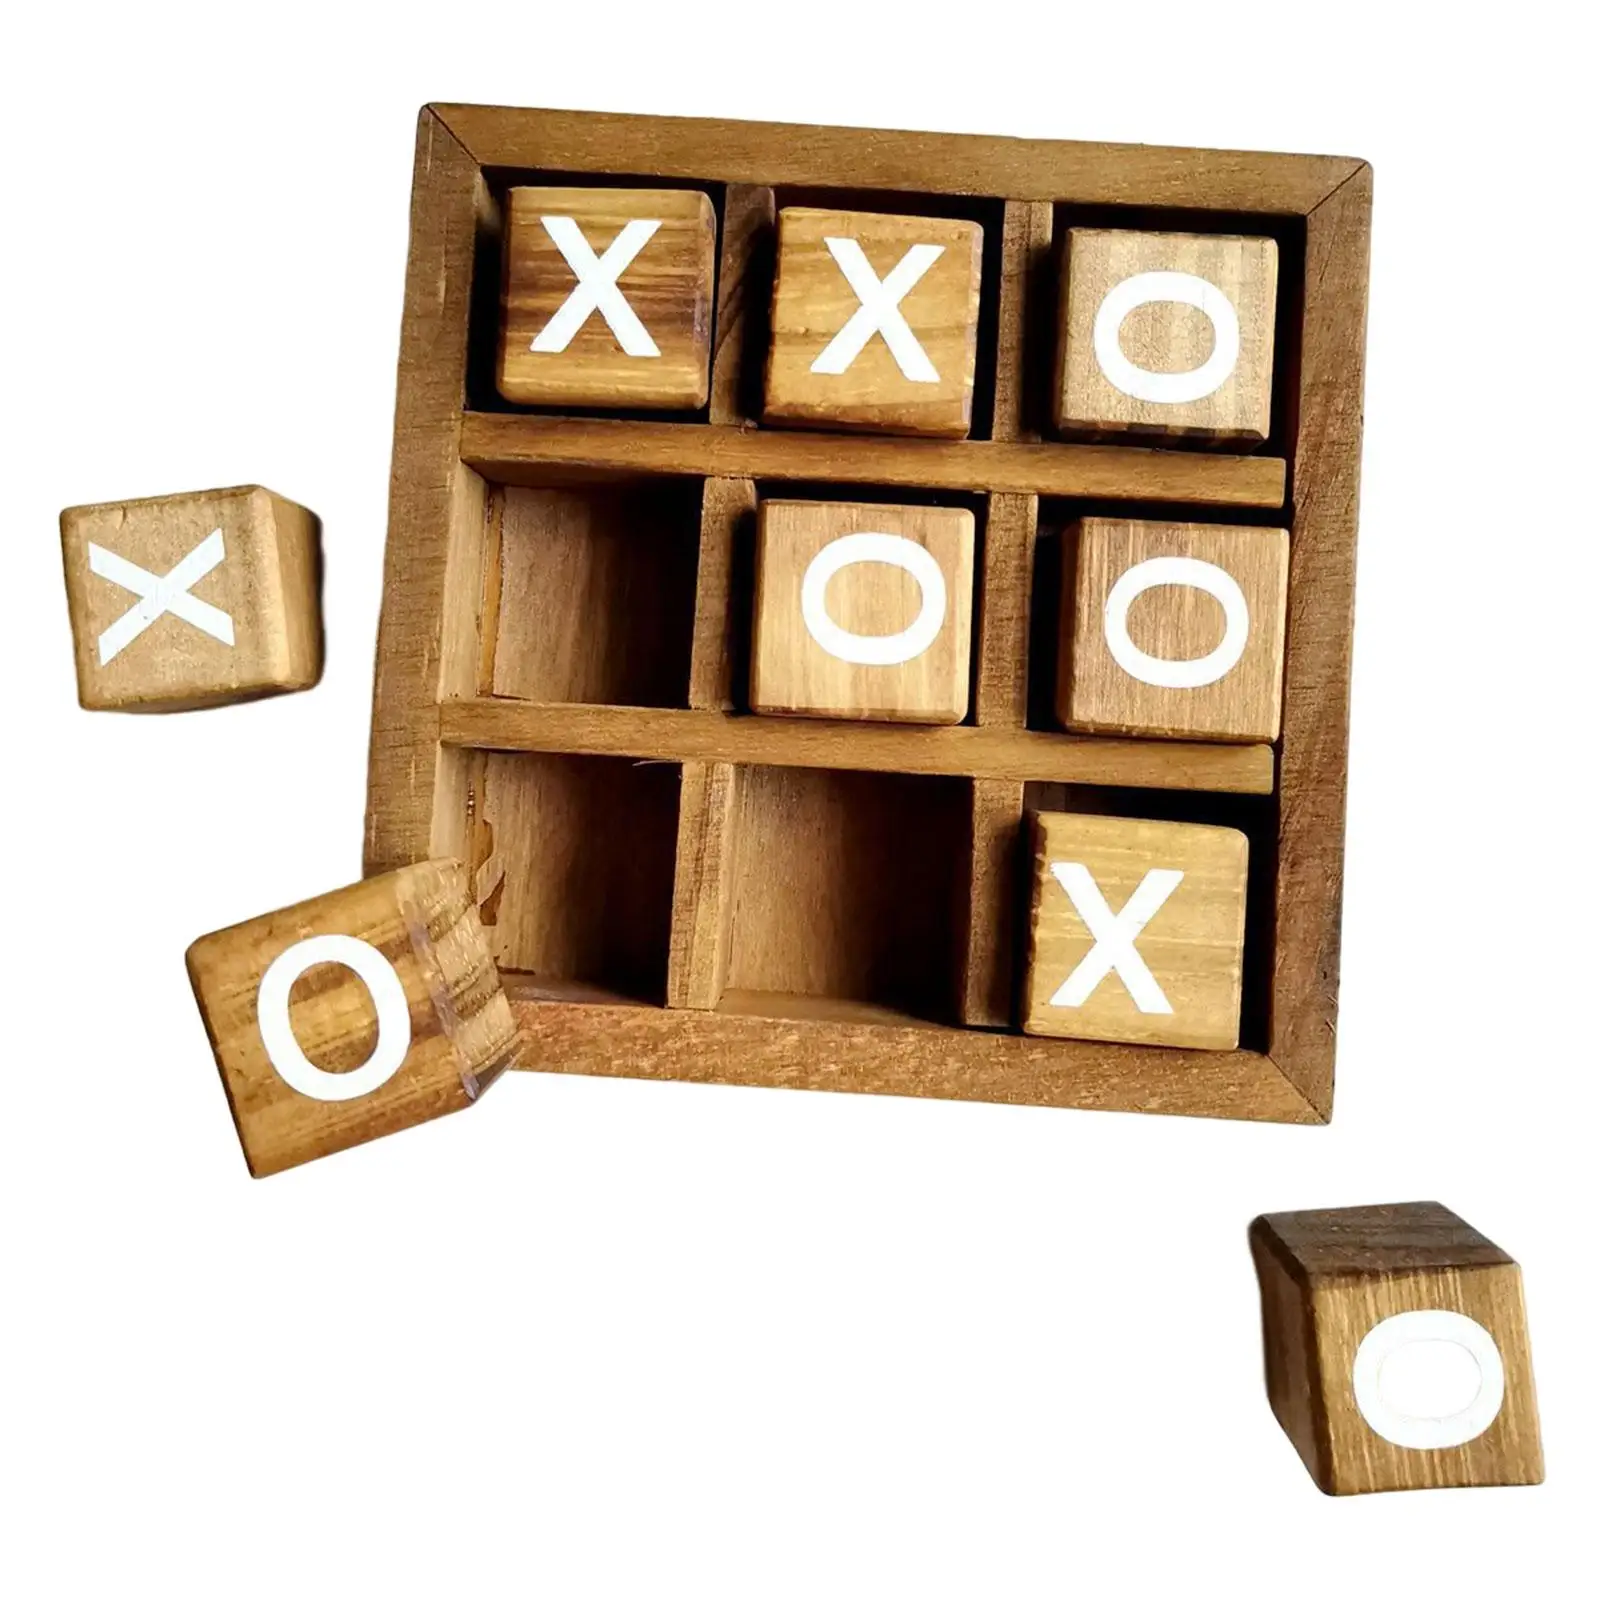 Wooden Tic TAC Toe Game Table Games Party Favor Fun Indoor Brain Teaser Travel for Adults Home Decor